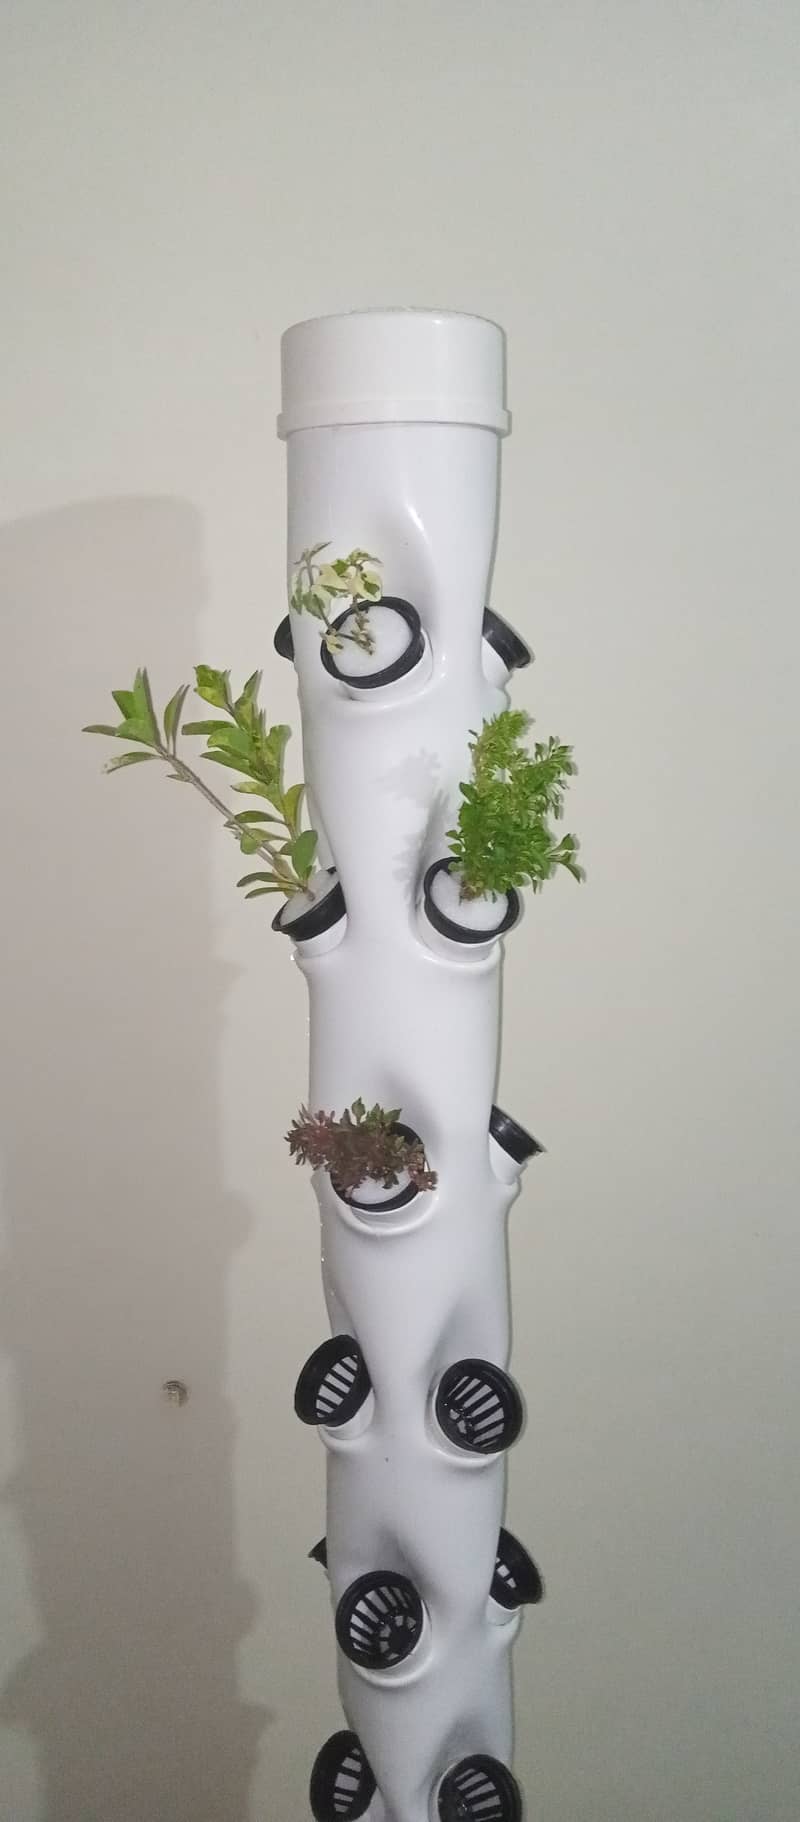 Garden Hydroponic Growing System Vertical Tower - Vegetable Pla 2